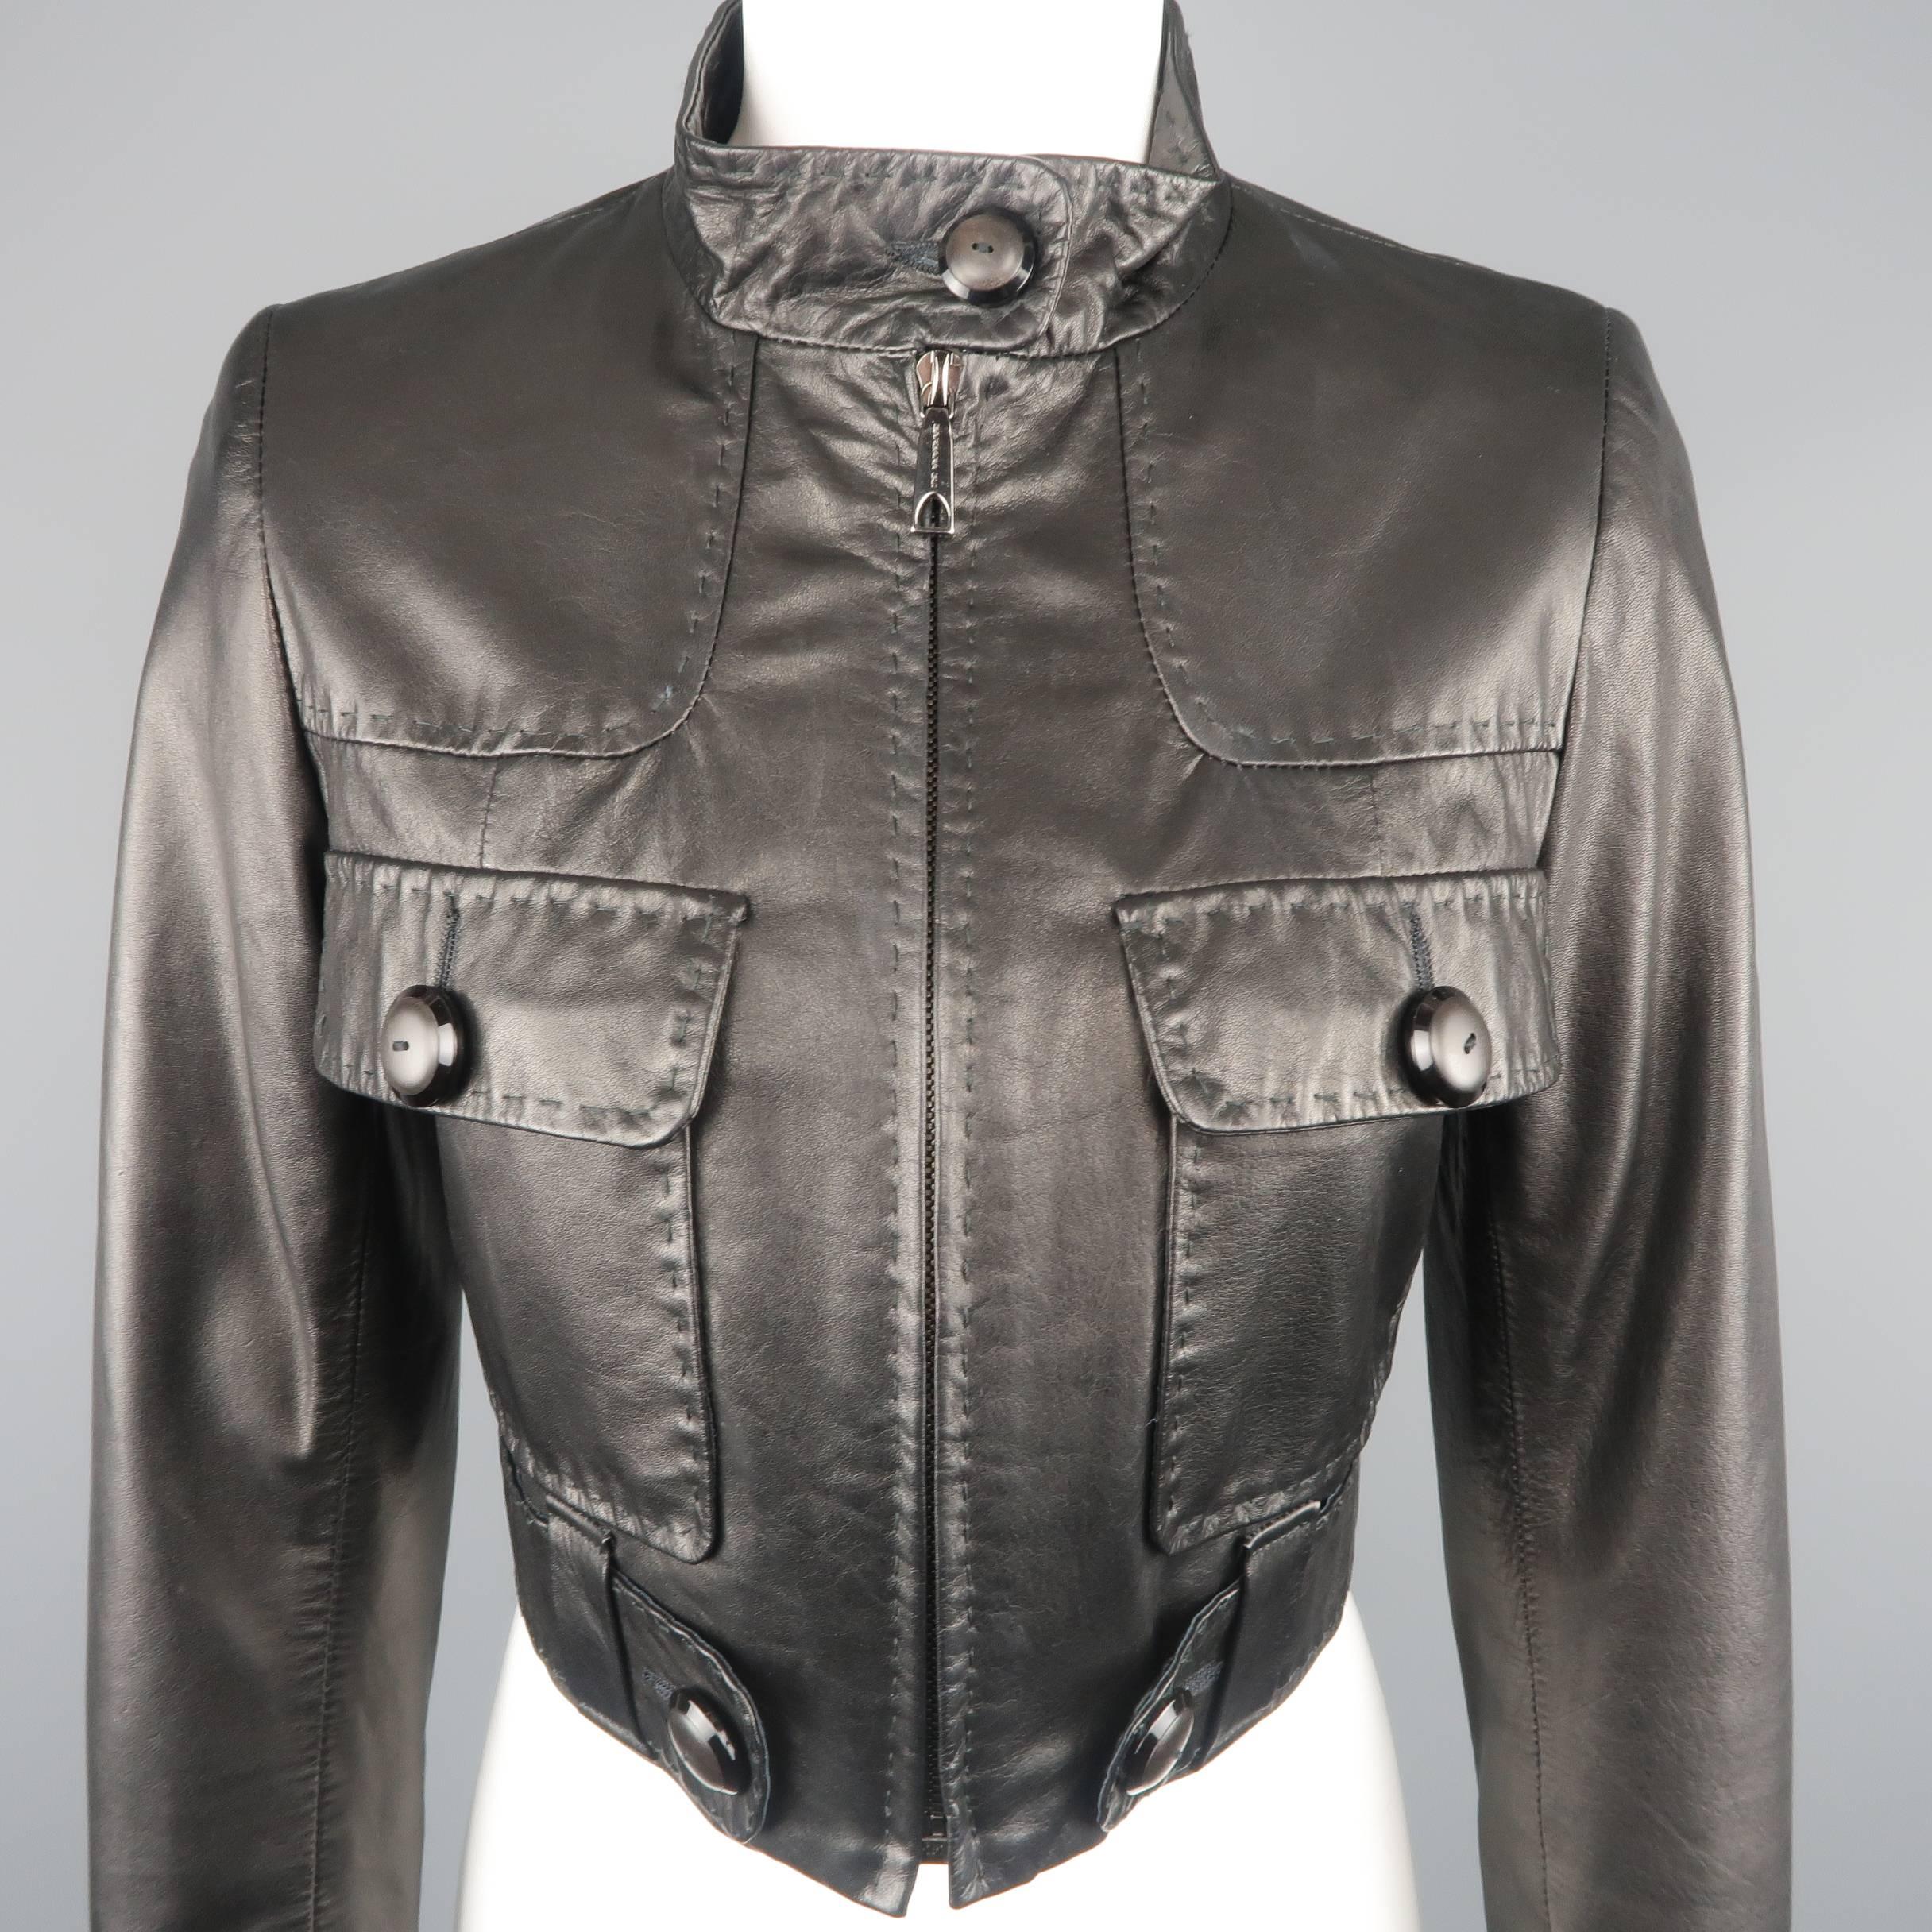 BARBARA BUI cropped bomber jacket comes in smooth black leather with a stand up button collar, patch flap pockets, tab belt, and top stitching throughout. Minor wear.
 
Good Pre-Owned Condition.
Marked: EU 36
 
Measurements:
 
Shoulder: 14 in.
Bust: